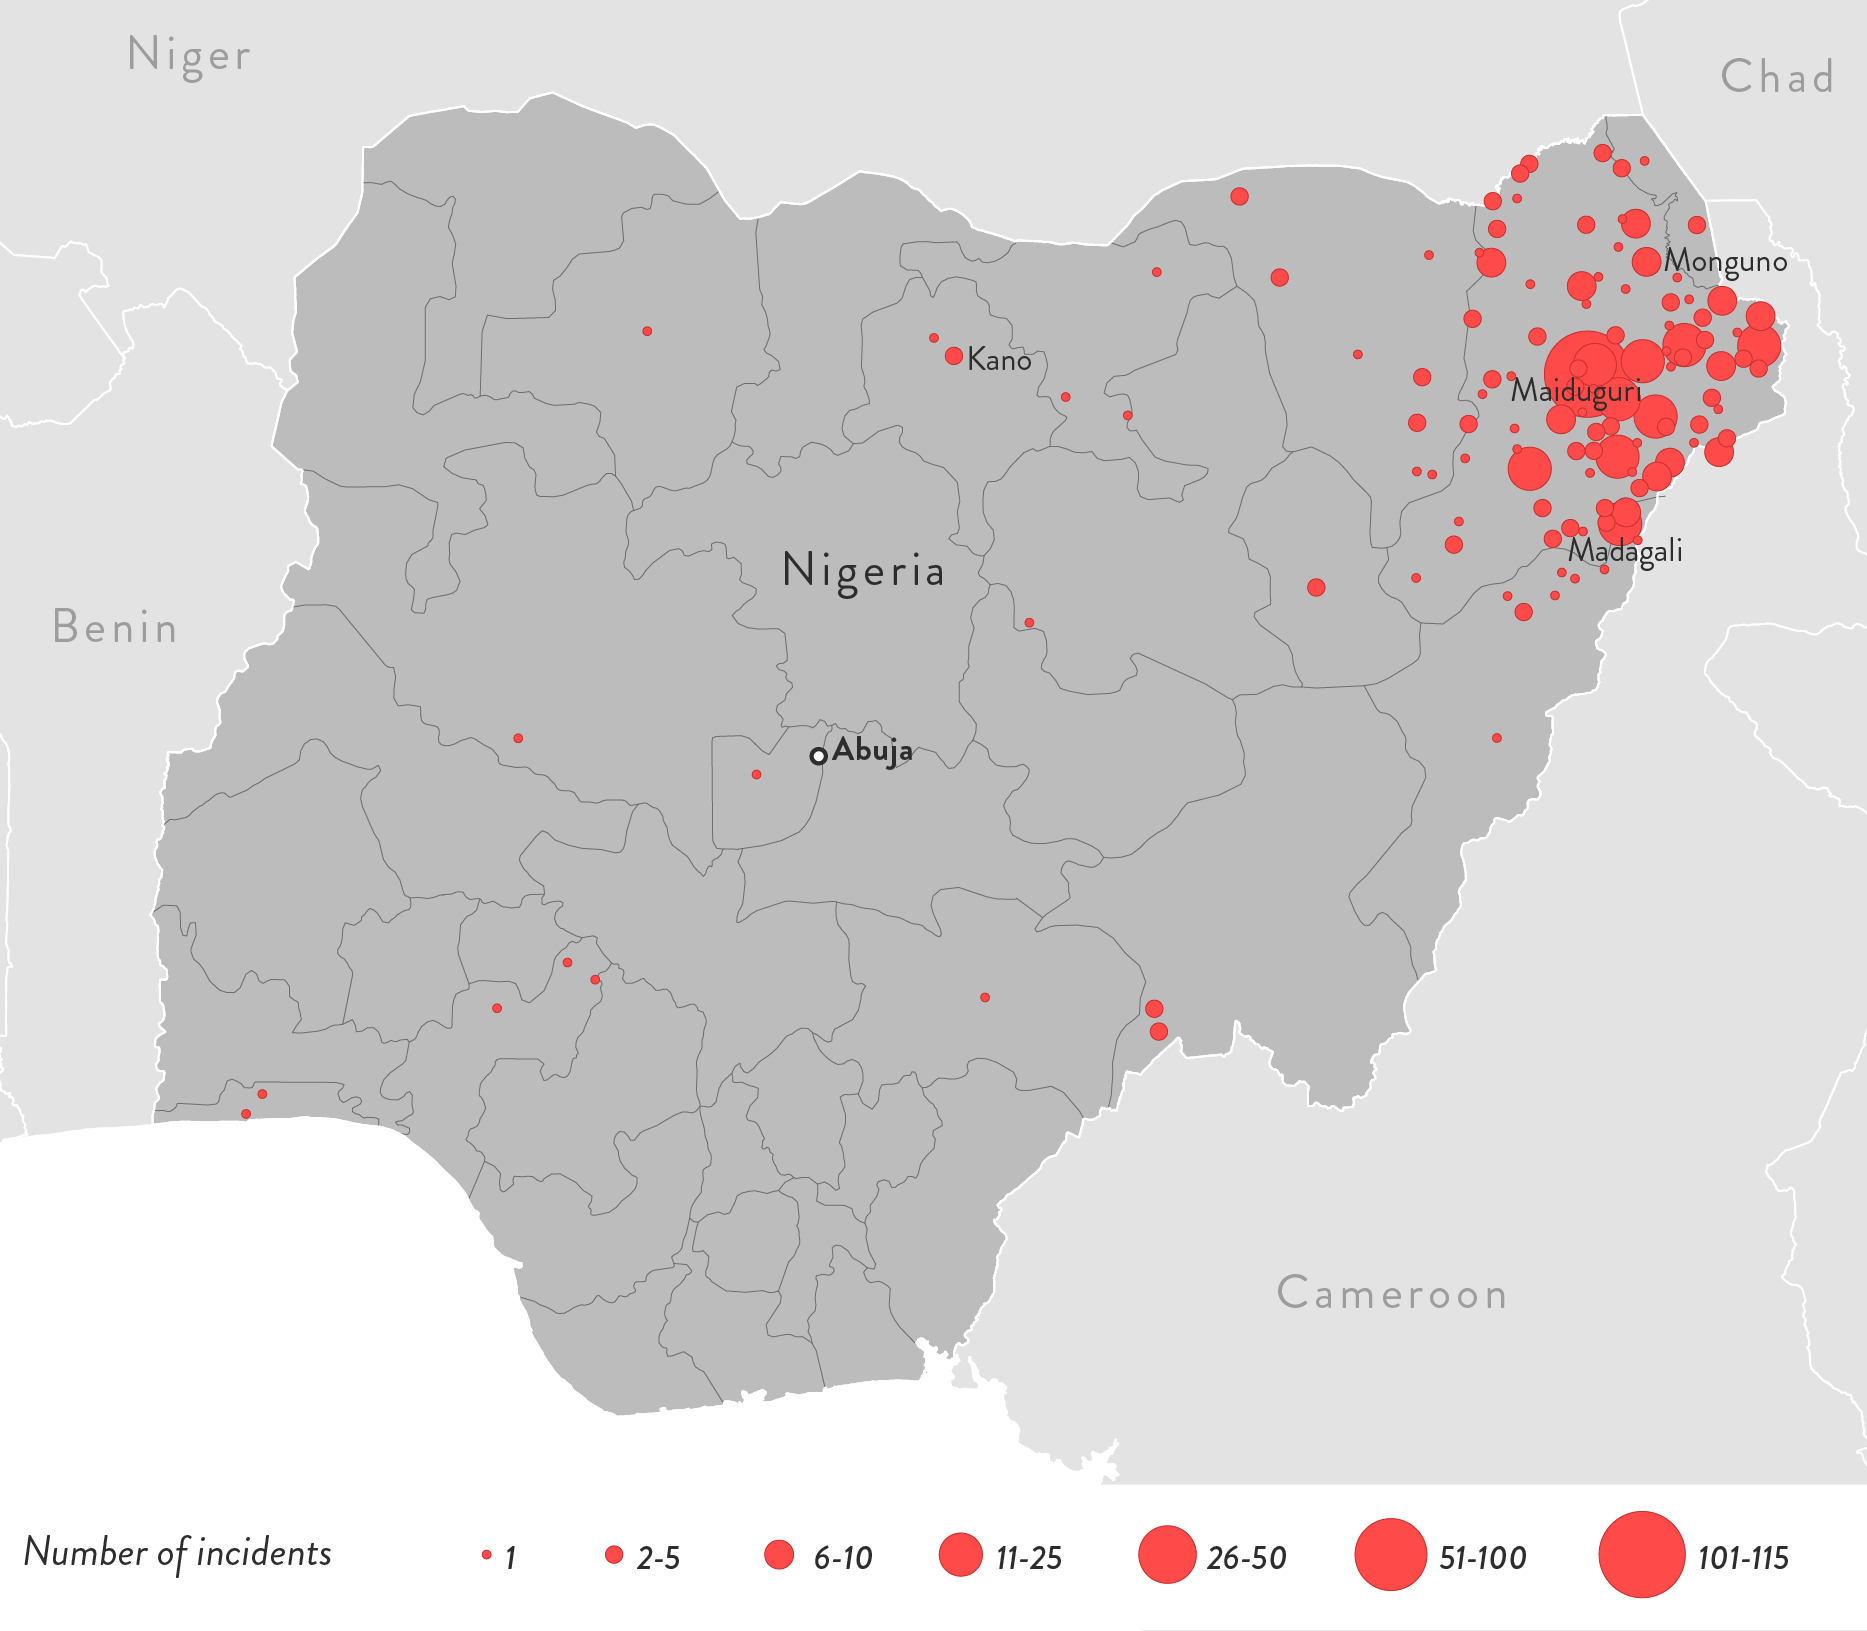 islamist-extremism-2017-ten-deadliest-countries - Figure 2.13: Map of Violent Islamist Incidents and Counter-Measures in Nigeria, 2017